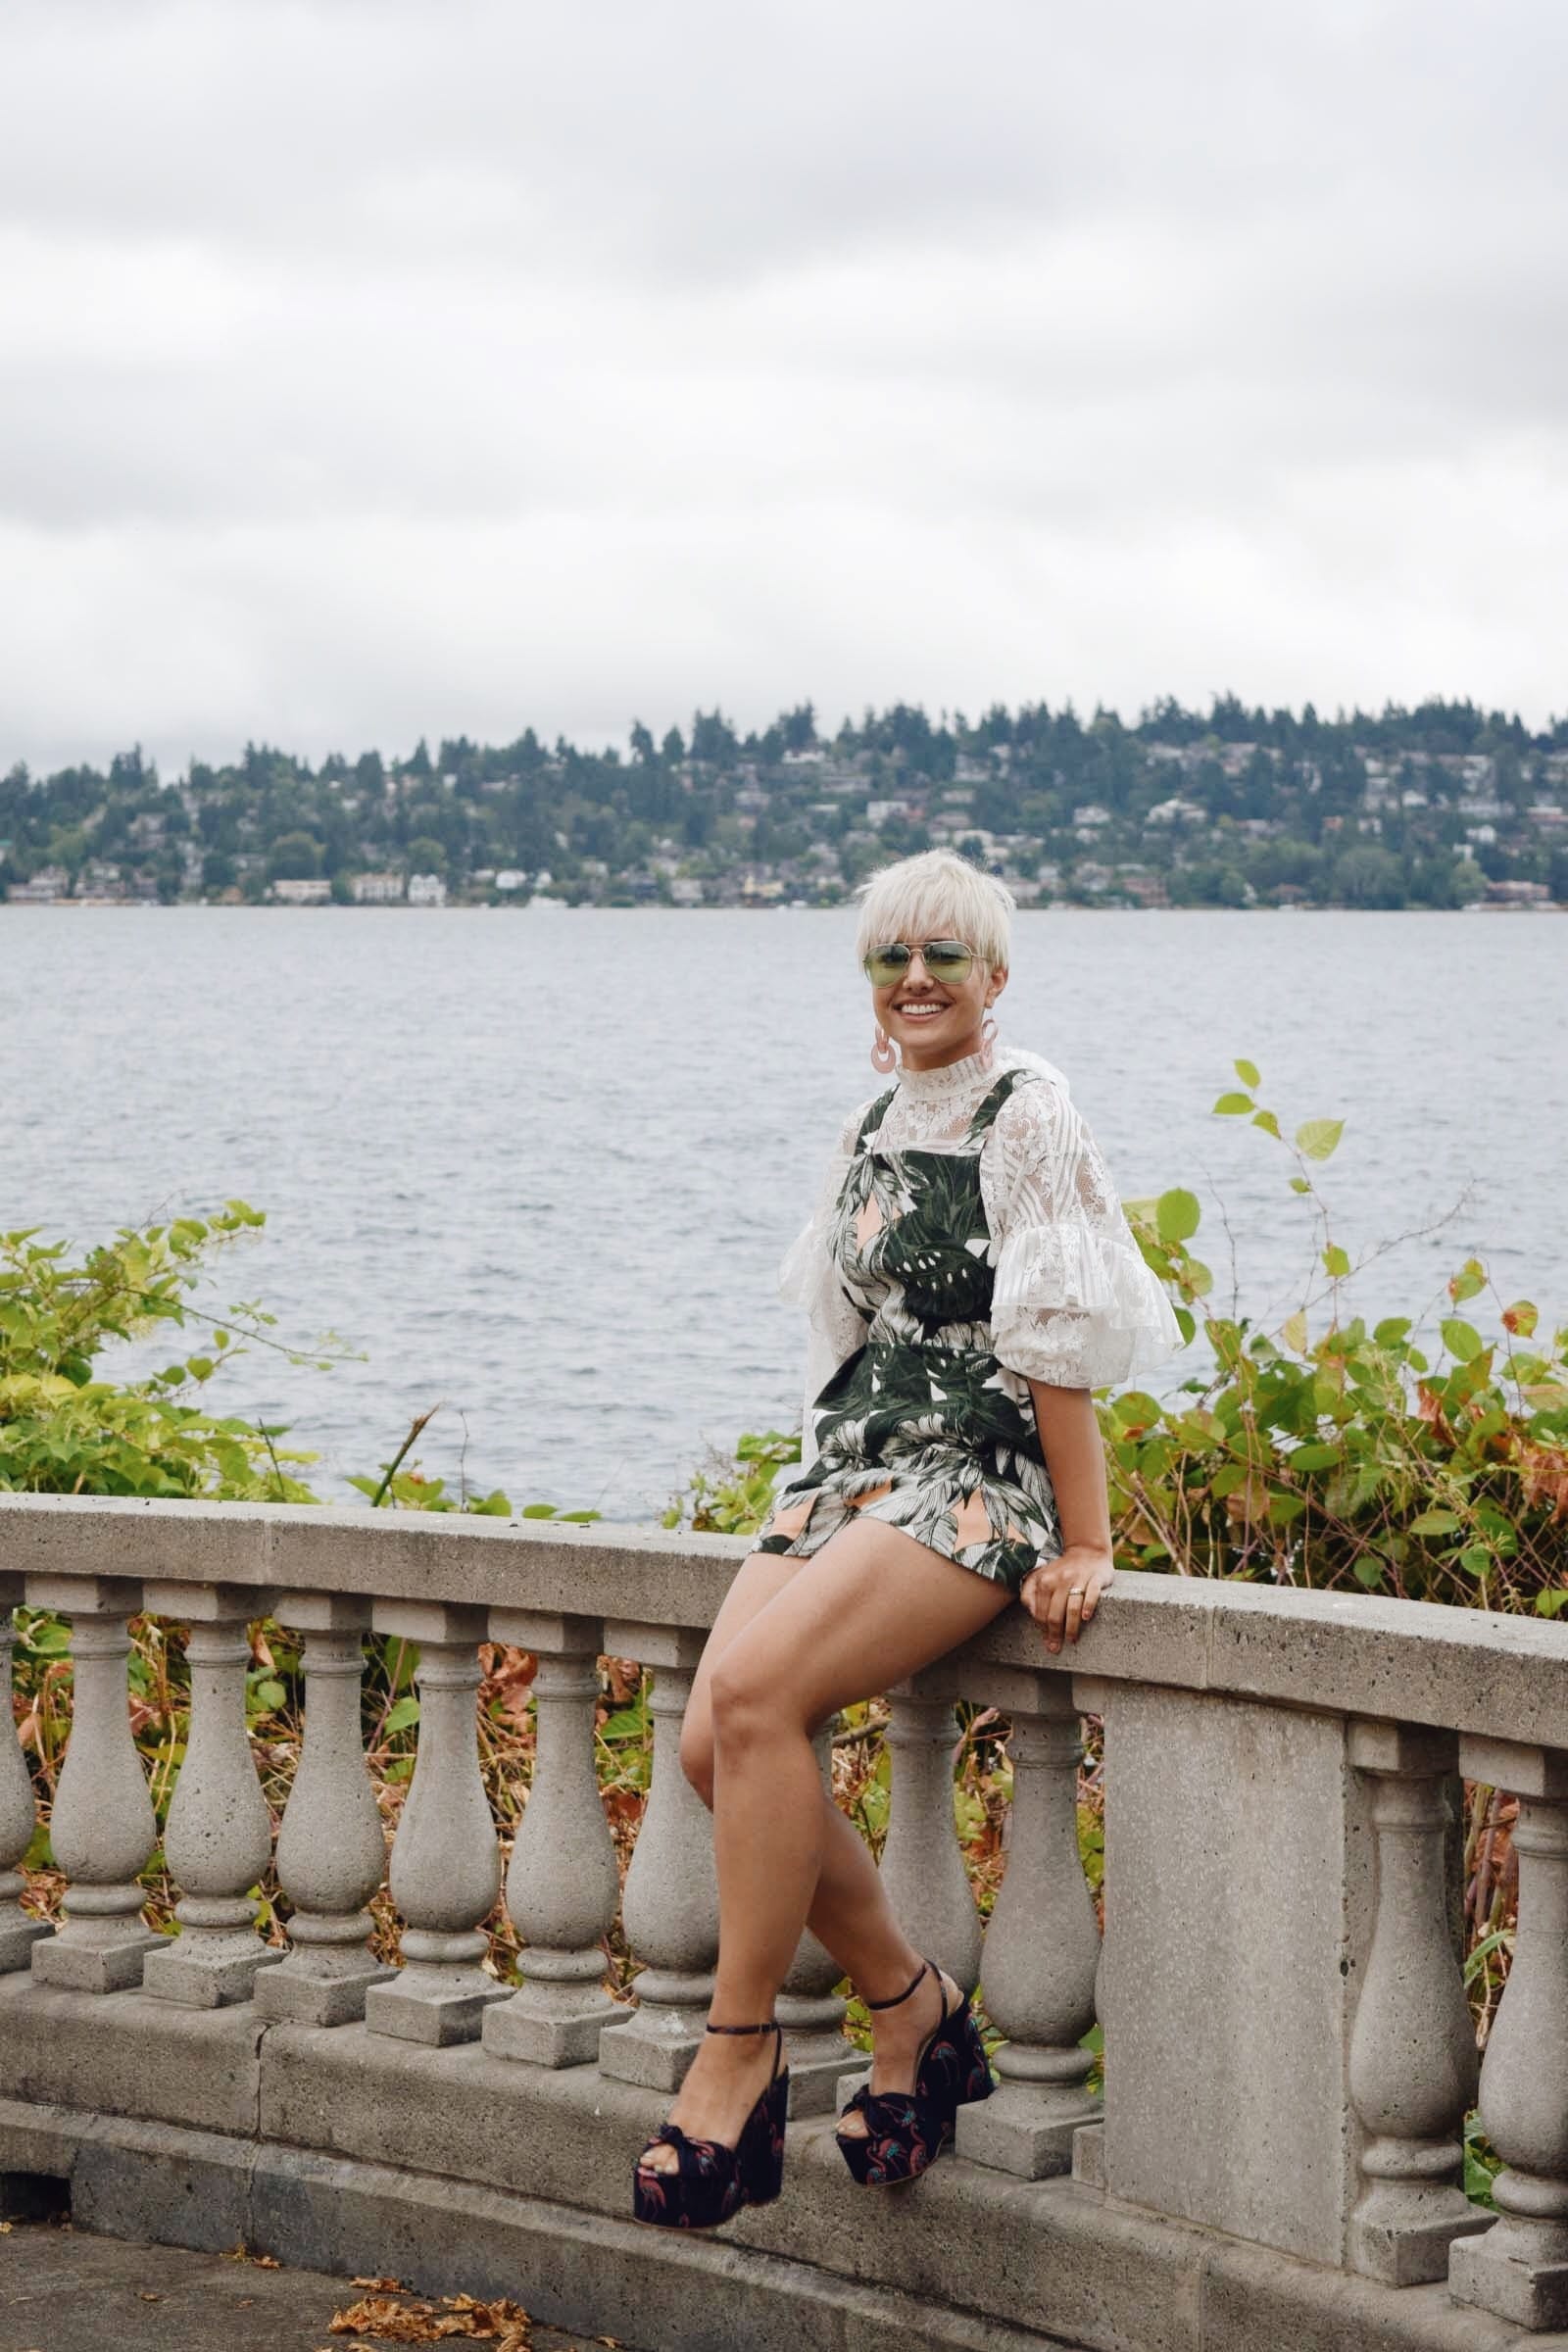 3 Ways to Transition Your Summer Clothing Into Fall - Topshop Playsuit - BloggerNotBillionaire